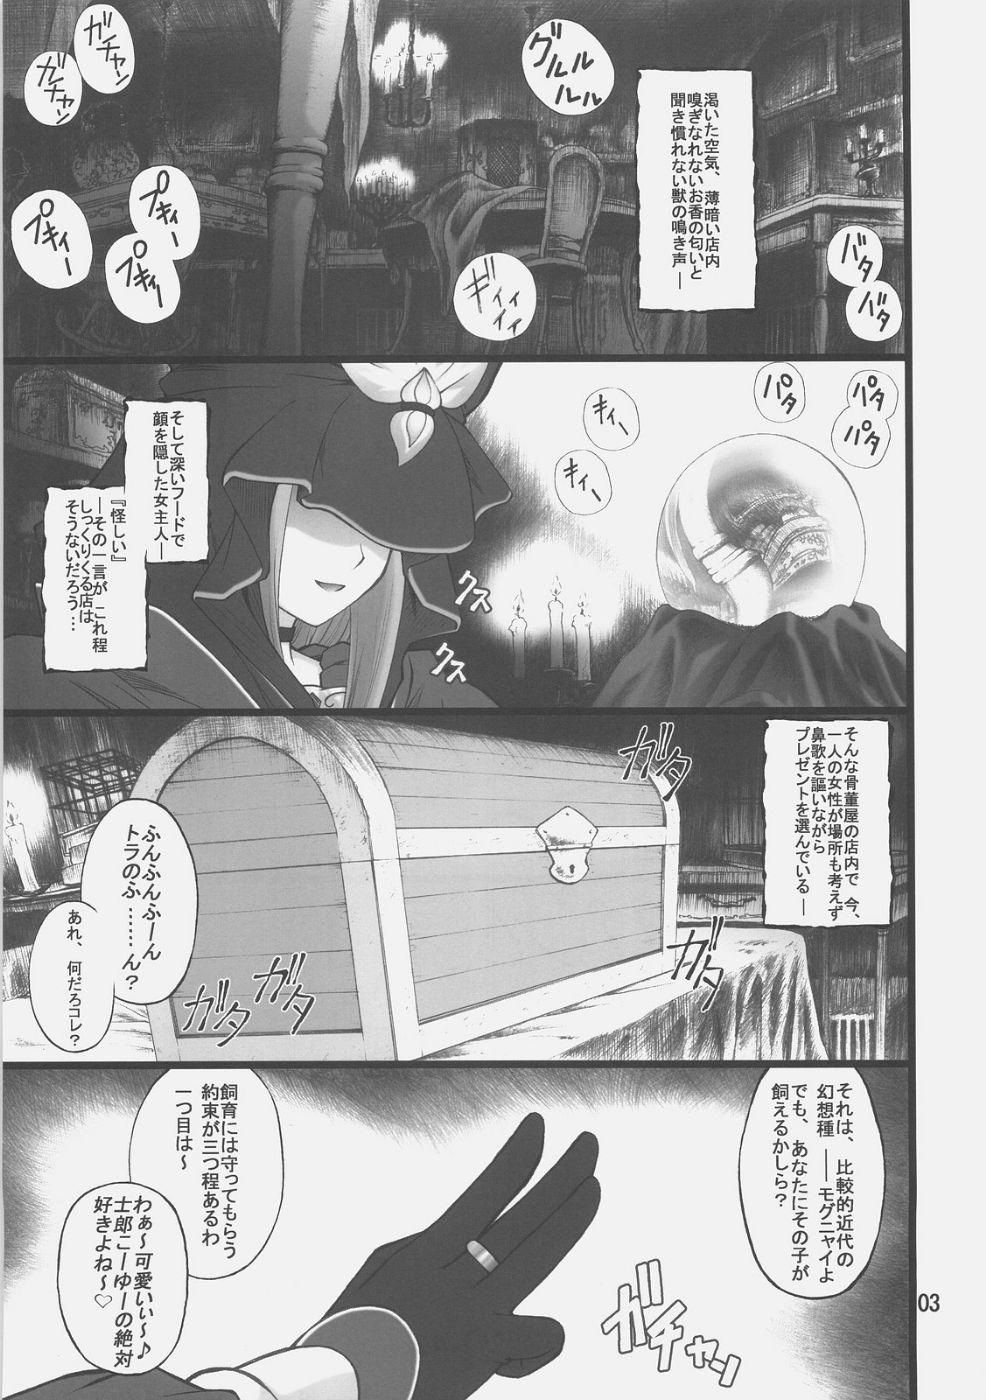 Rough Sex Porn Grem-Rin 1 - Fate stay night Squirting - Page 2